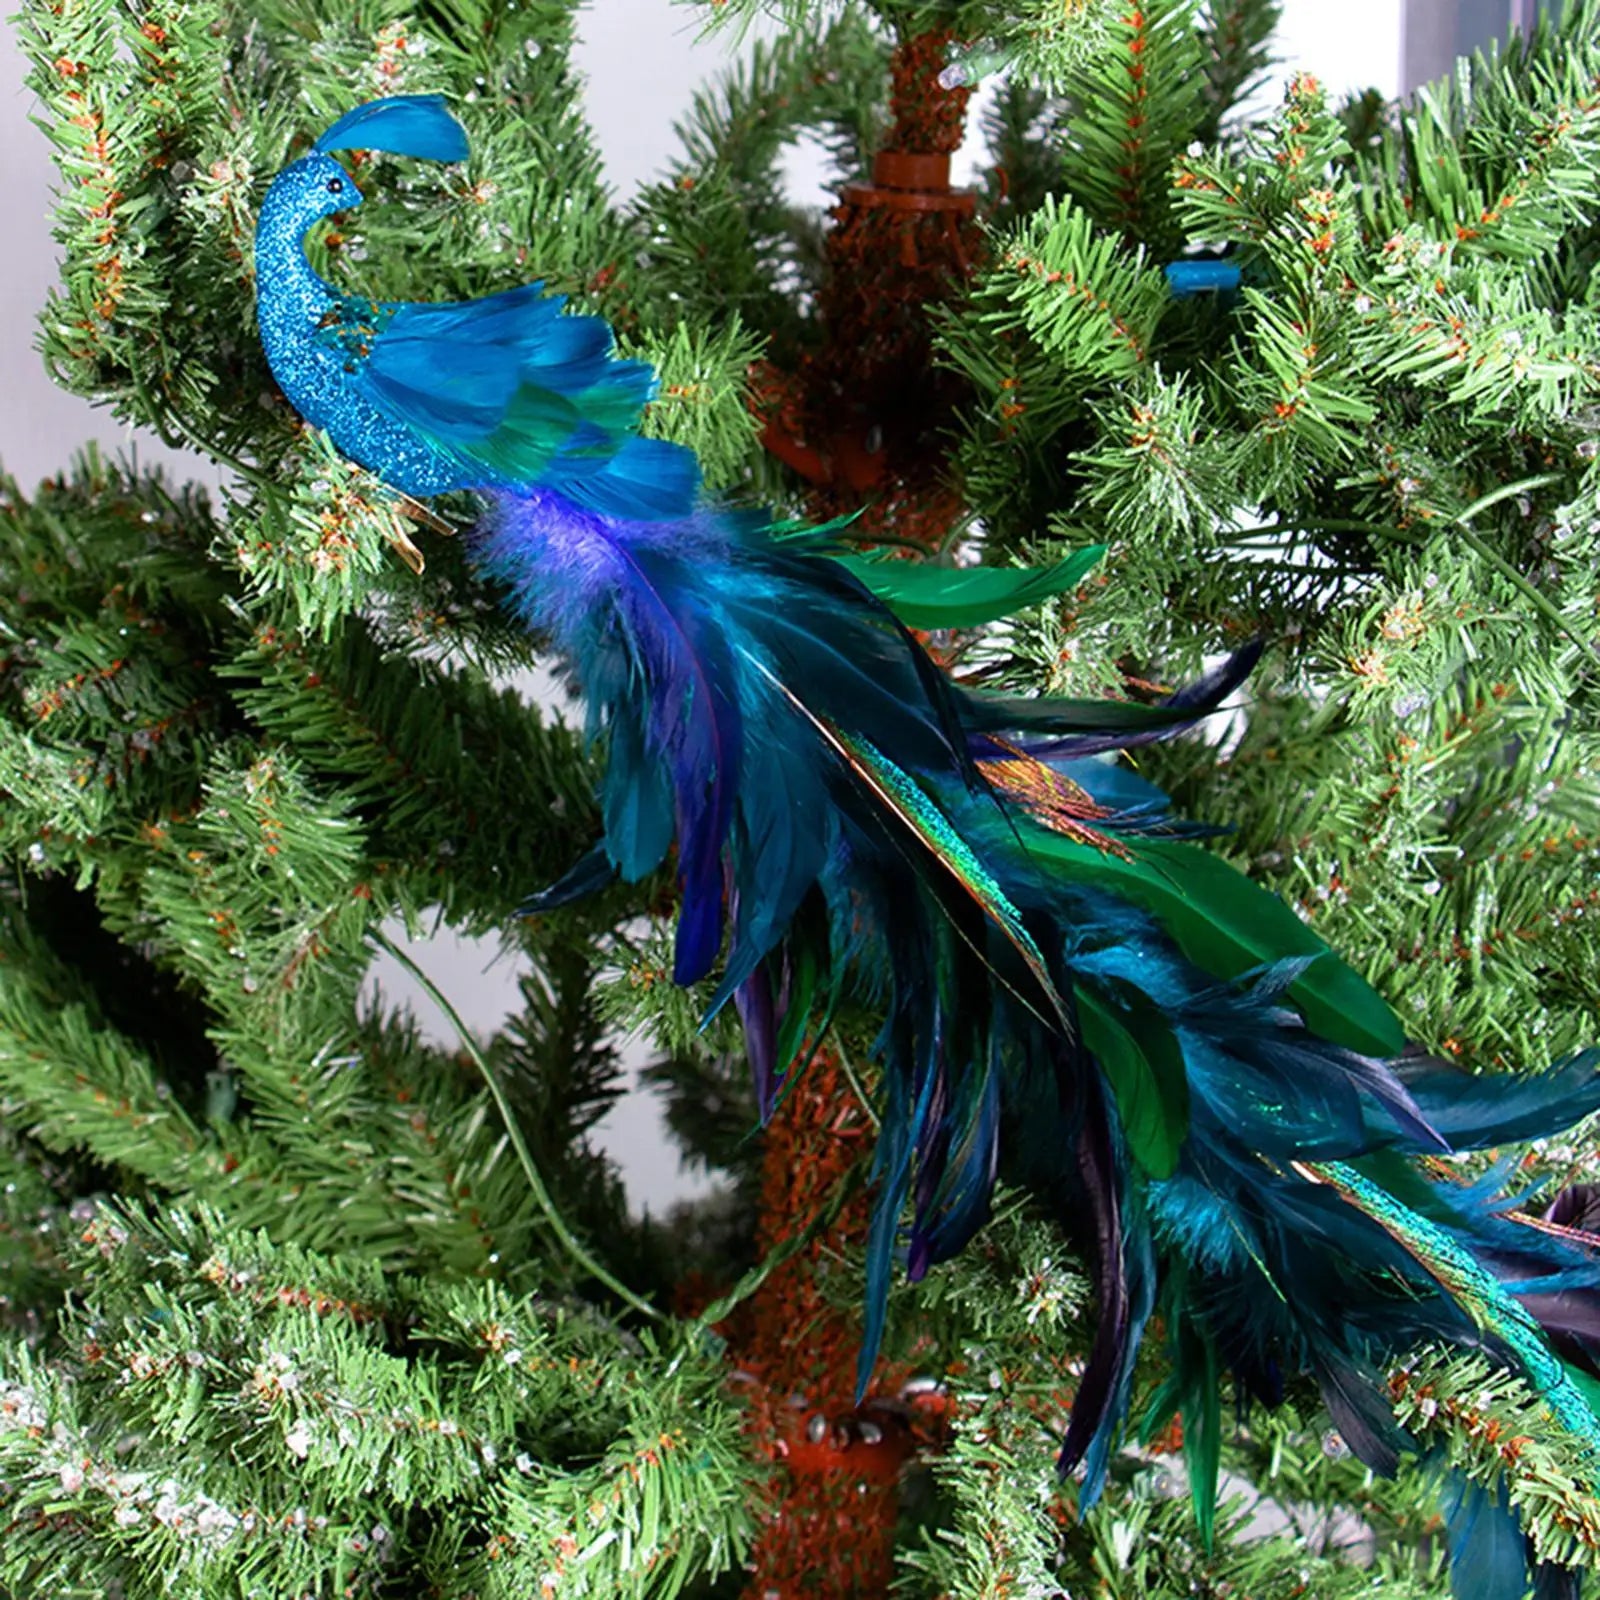 Turquoise Peacock Decor Xmas Tree Hanging Decoration with Clip Craft Faux Peacock Glittered Bird for Festival Party Accessories - Delicate Leather